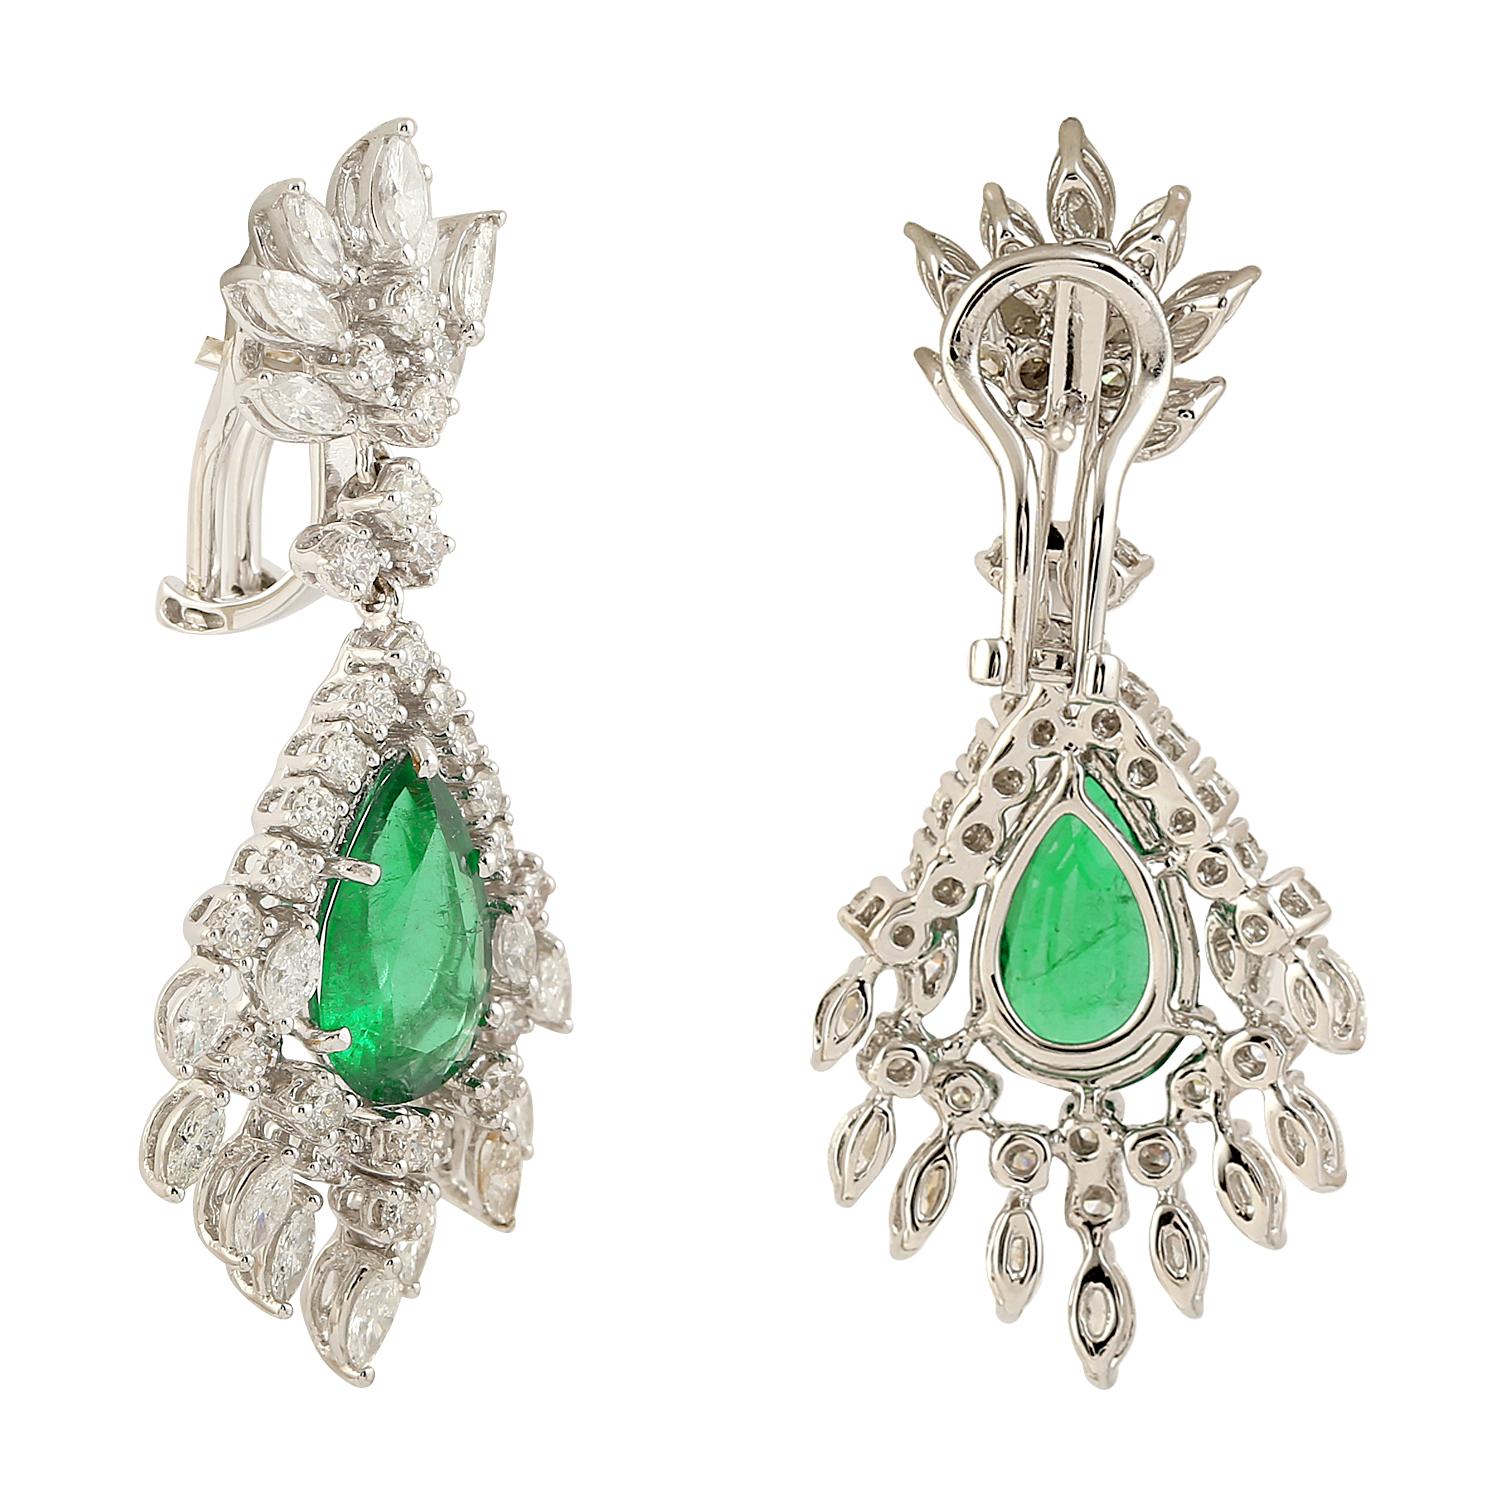 Cast in 14 karat gold, these exquisite earrings are hand set with 5.25 carats emerald and 3.8 carats of glimmering diamonds. 

FOLLOW MEGHNA JEWELS storefront to view the latest collection & exclusive pieces. Meghna Jewels is proudly rated as a Top